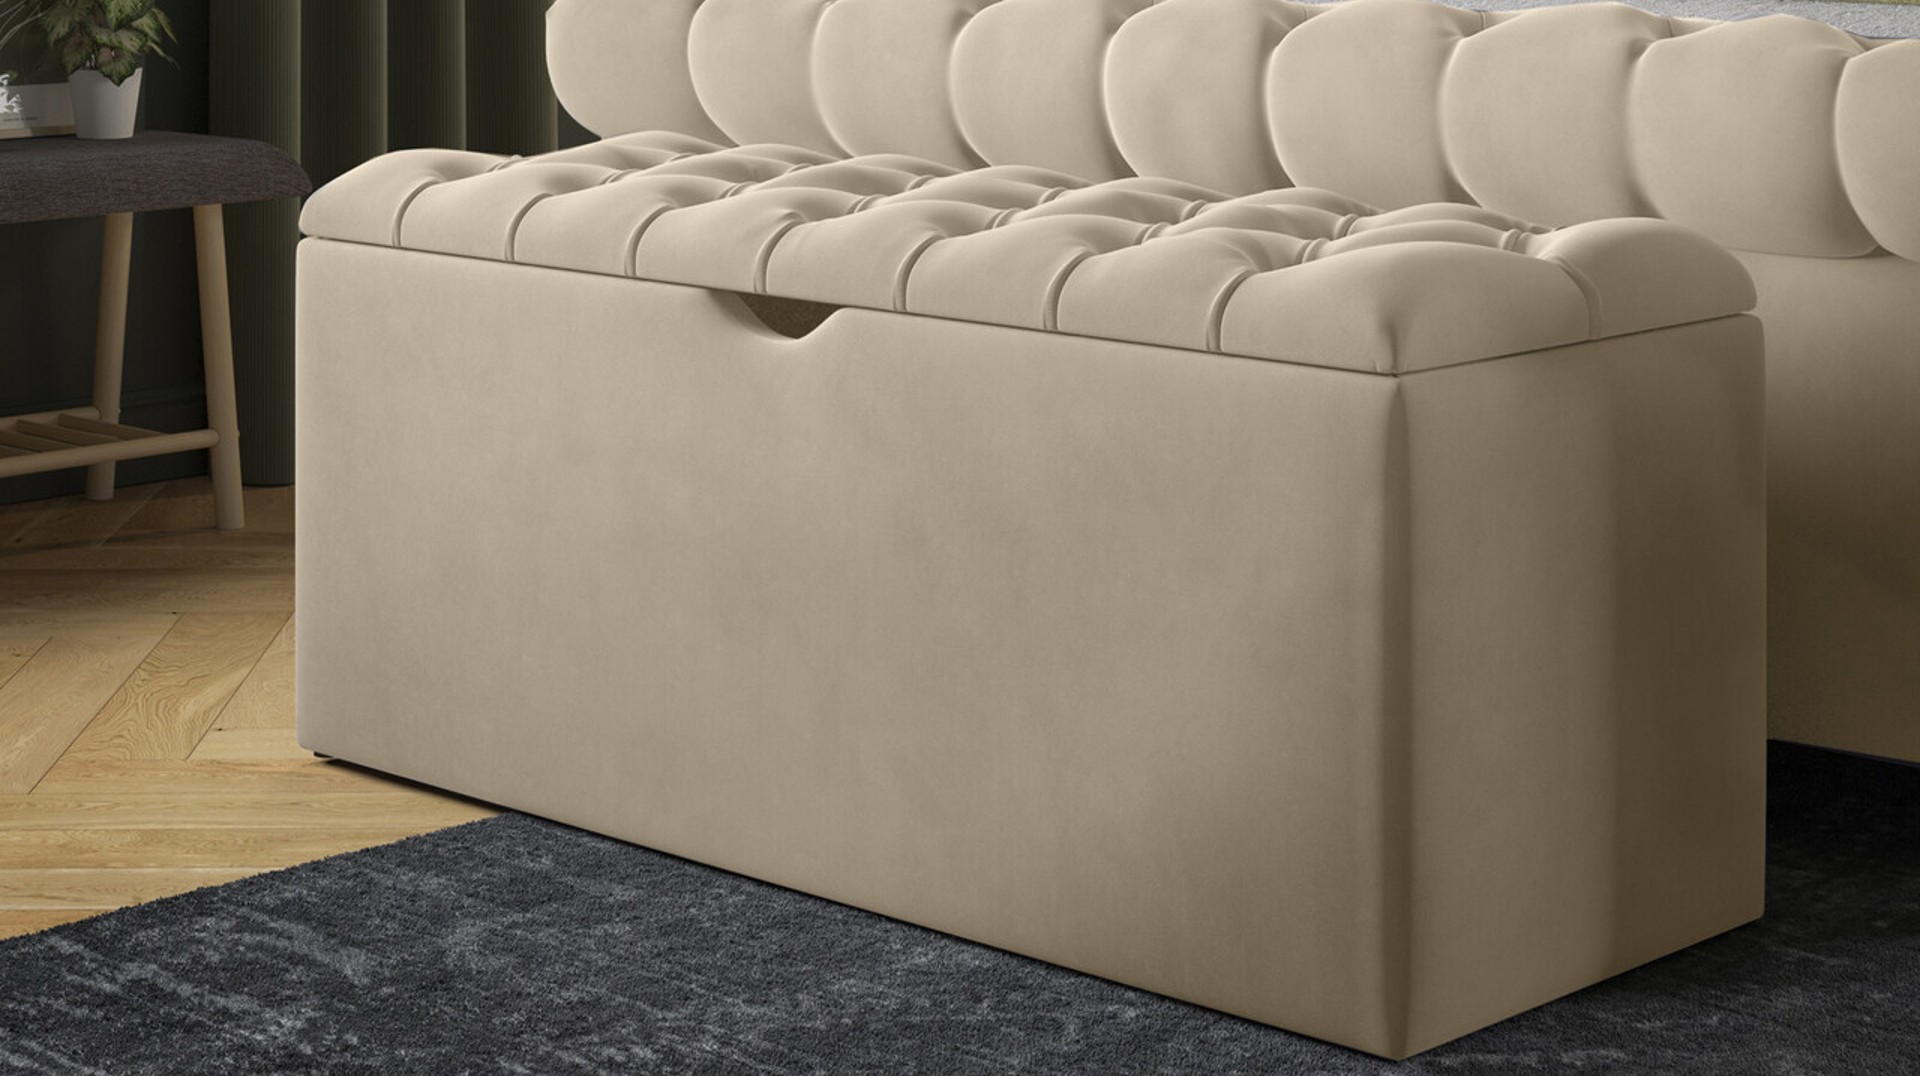 Upholstered ottoman blanket box with cushioned seat and hidden storage